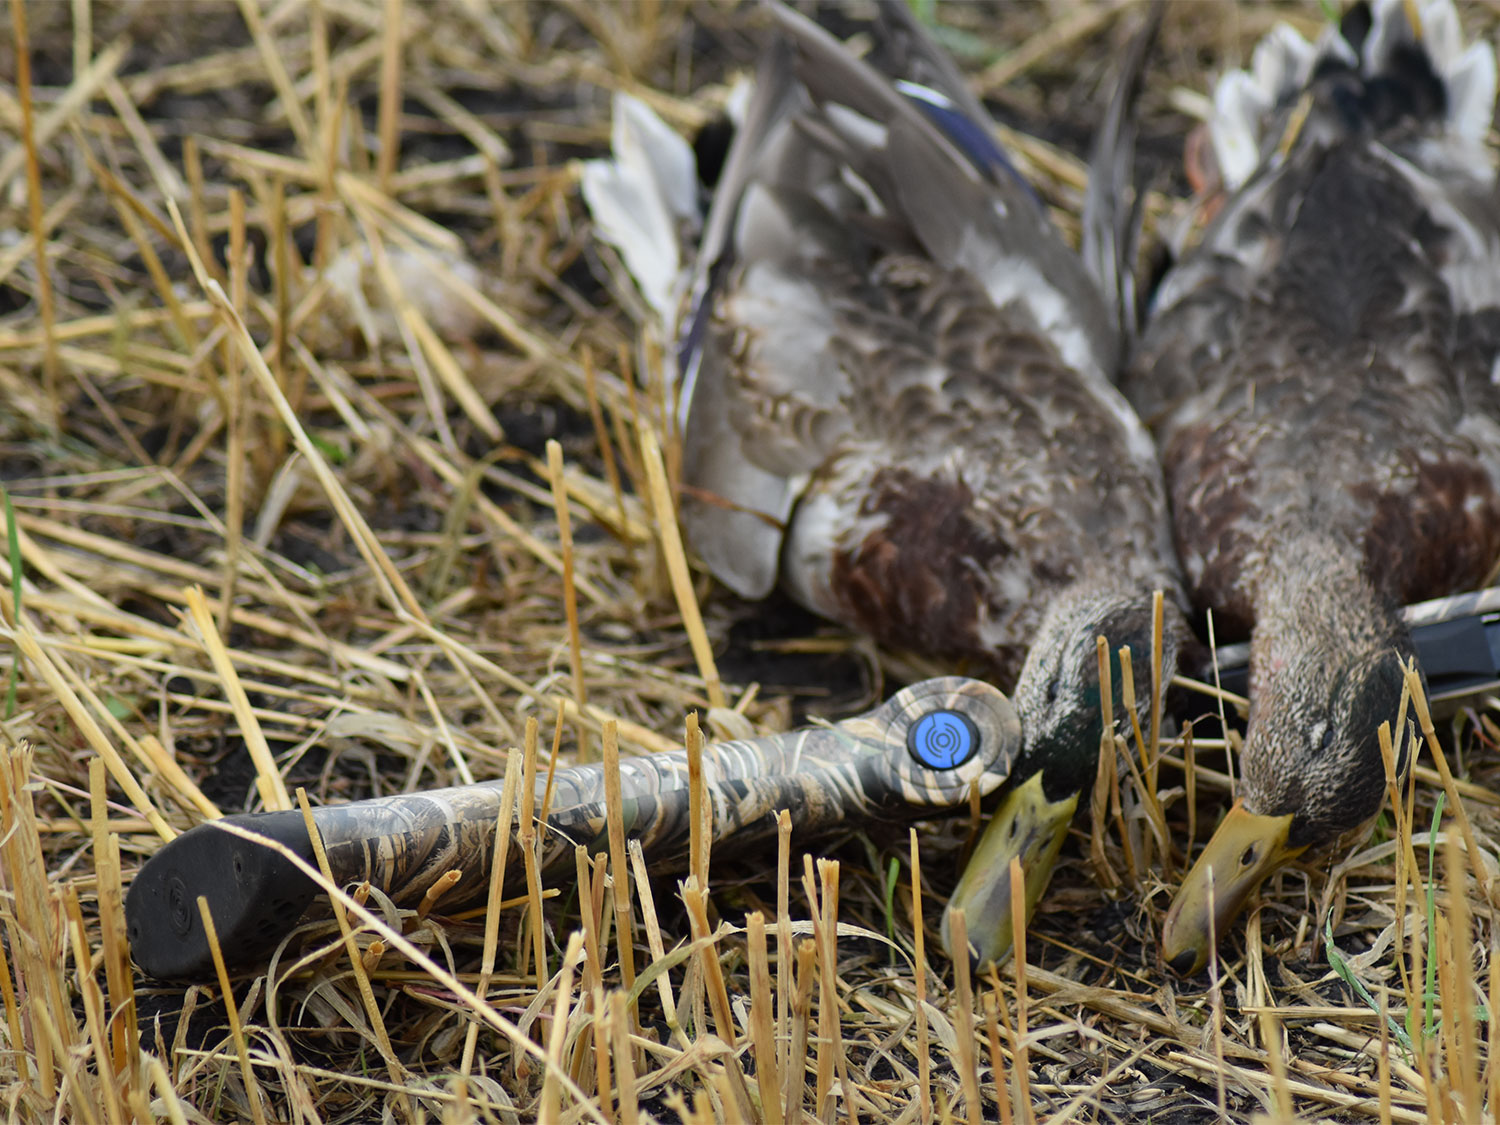 Two ducks resting on the stock of a rifle on the ground.